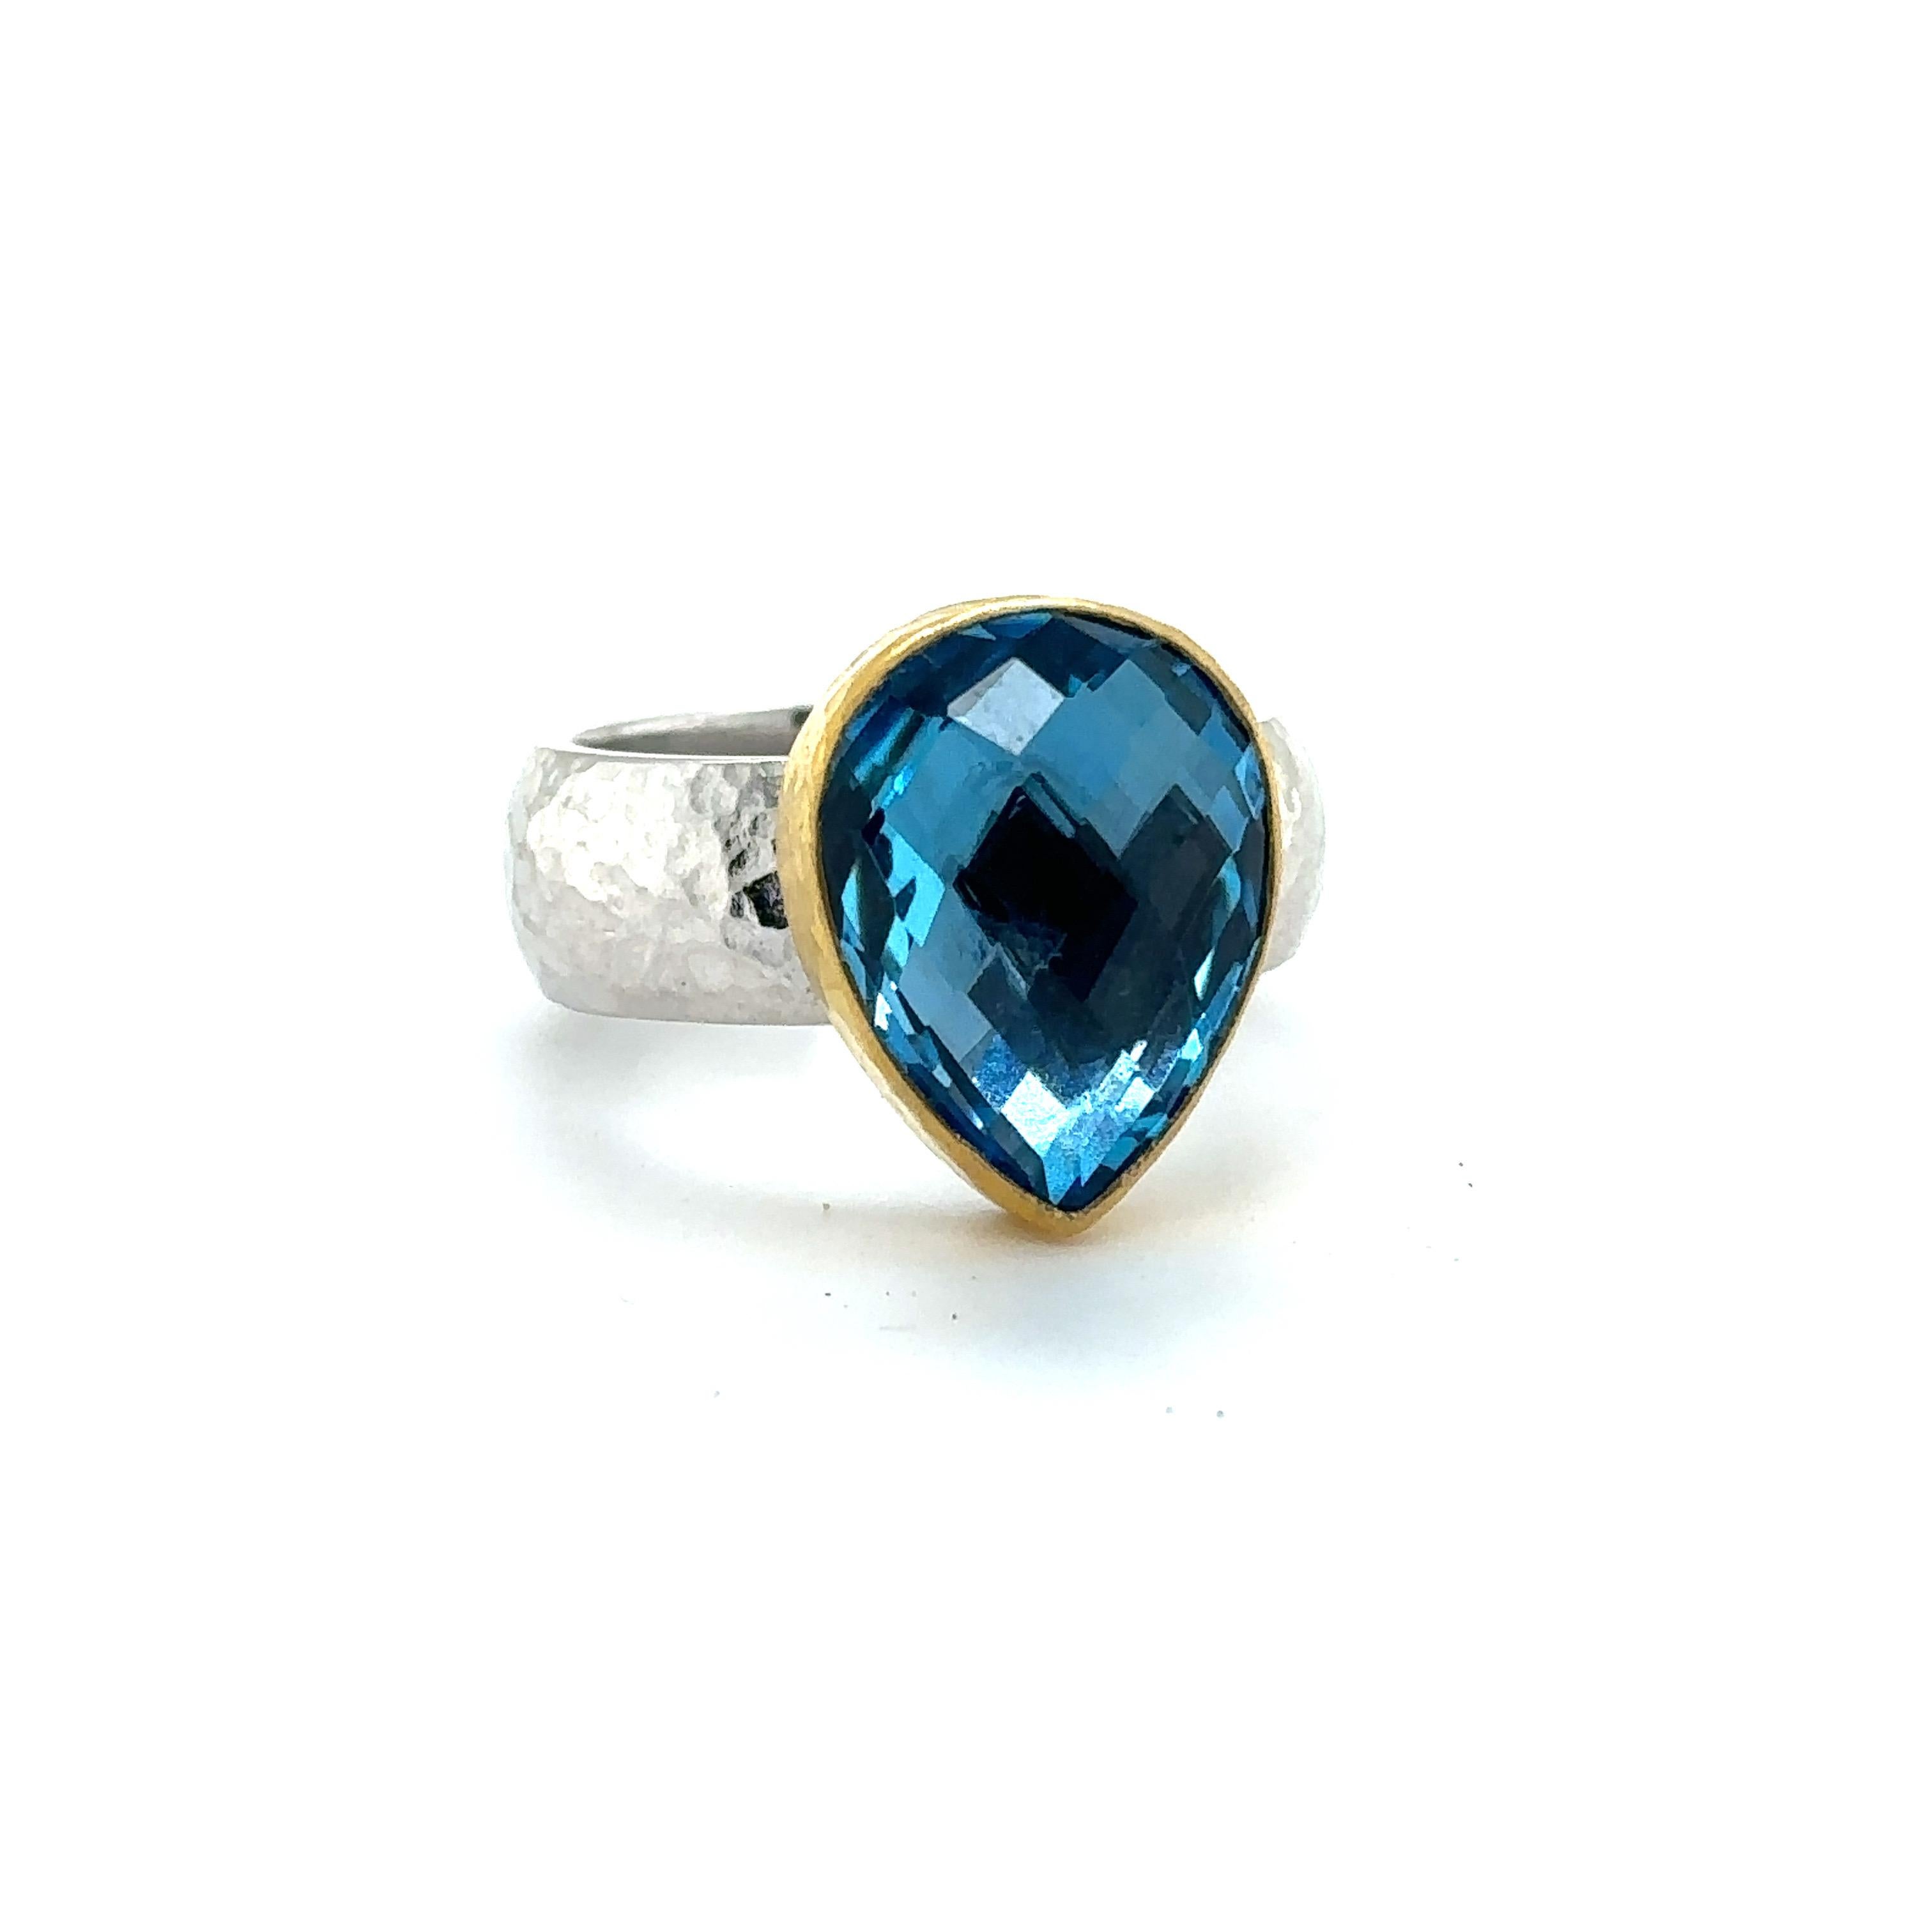 JAS-19-1918 - 24KT GOLD/SS RING with PEAR SHAPE SWISS BLUE TOPAZ For Sale 1